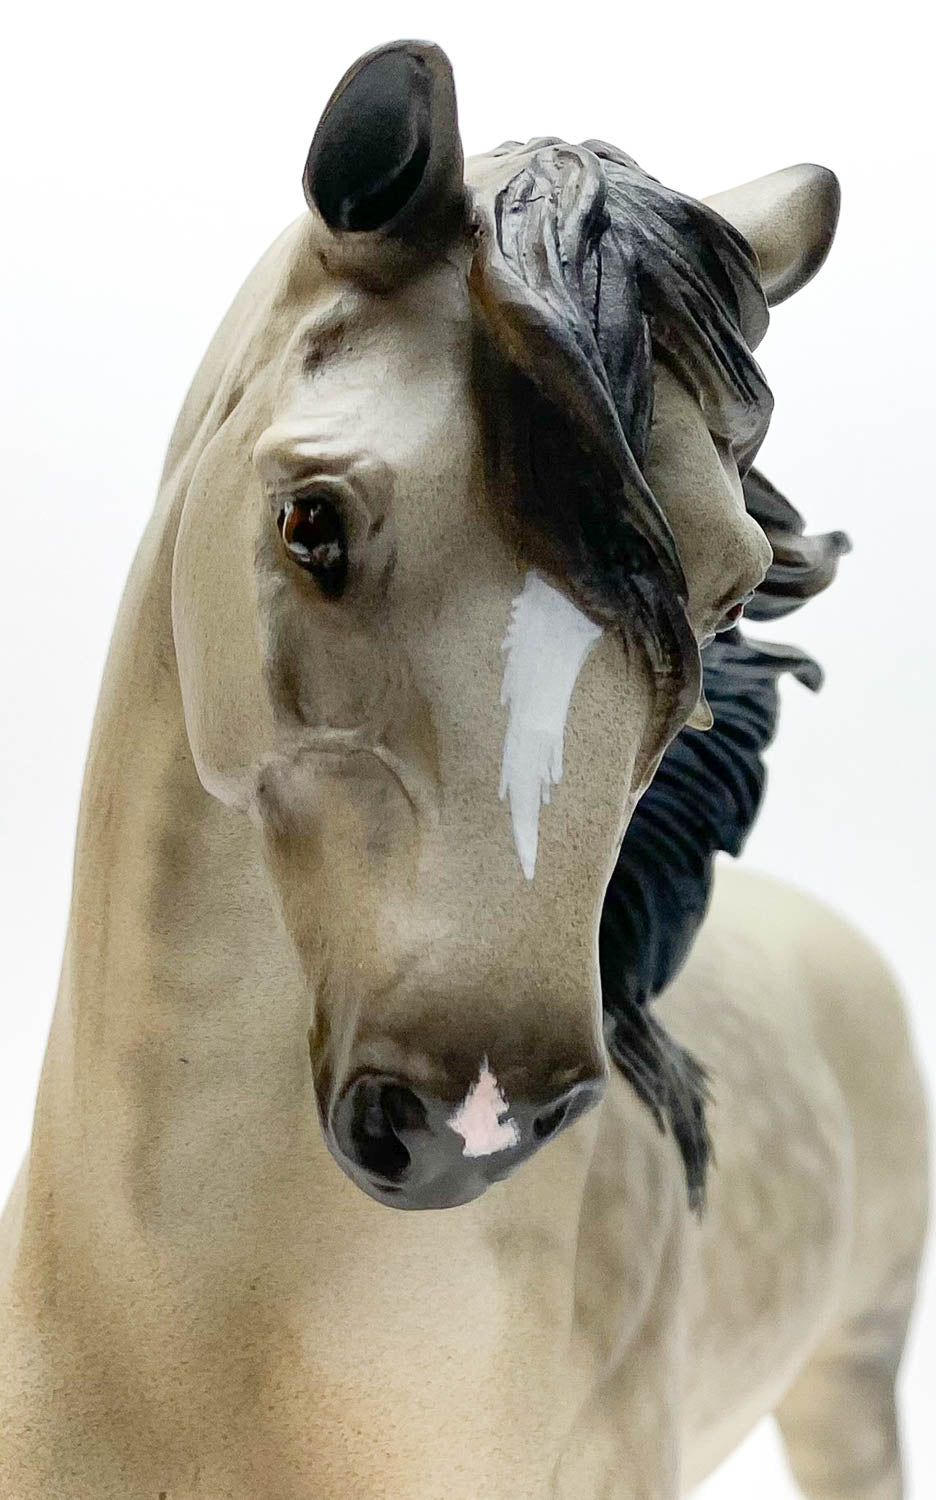 Andalusian ~ Leandro - Breyer Gallery Resin - JCP SR